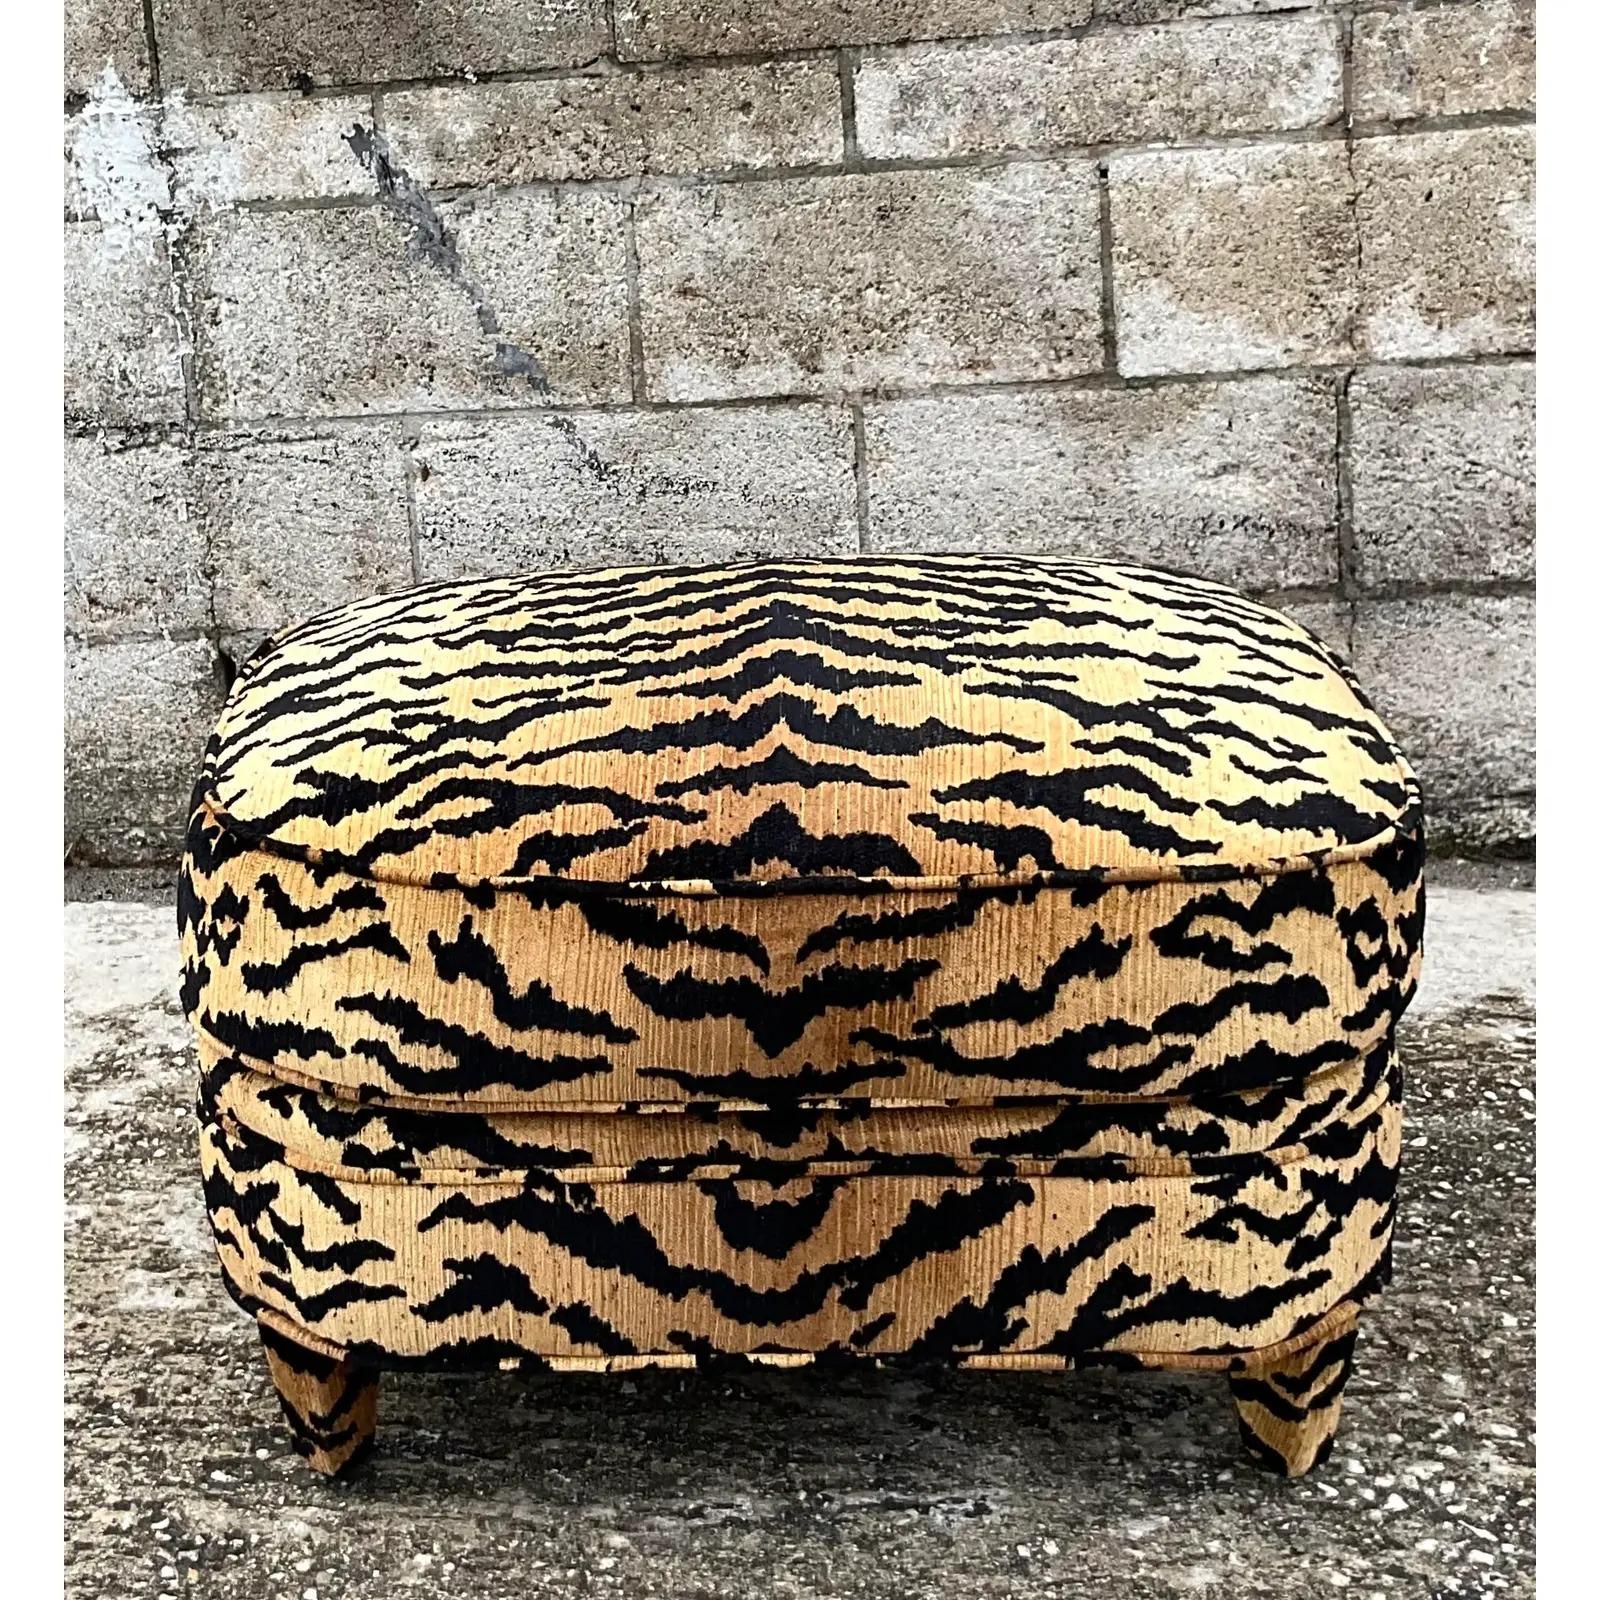 Fantastic vintage Devore upholstered ottoman. Chic tiger design fabric after the iconic Scalamandre fabric. Acquired from a Miami estate.